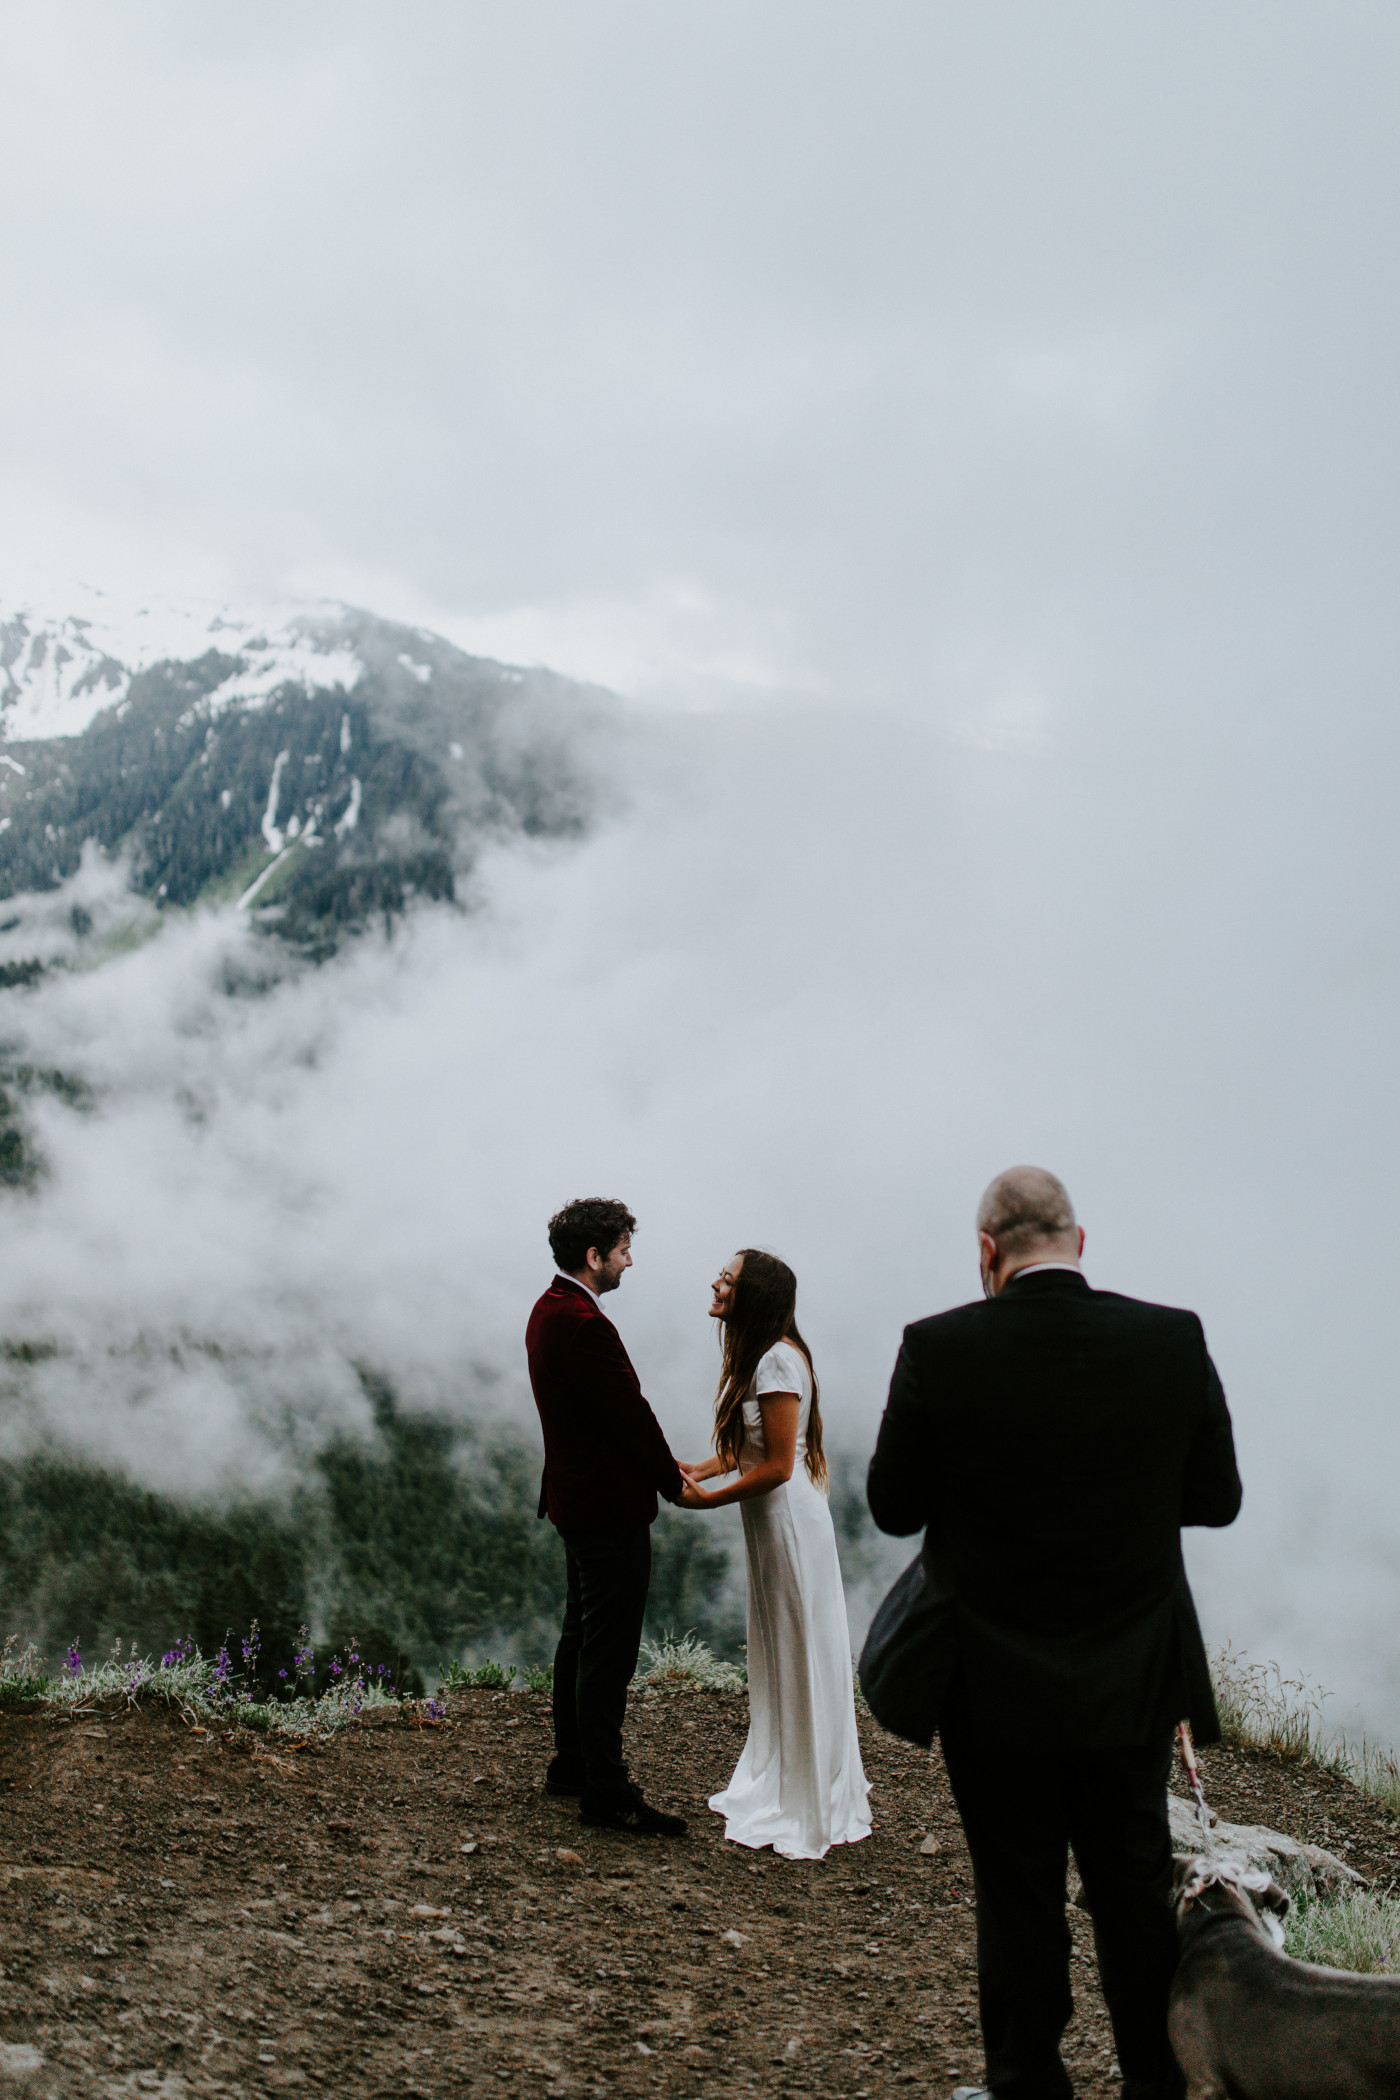 Murray and Katelyn stand face to face as their officiant reads to them. Elopement wedding photography at Mount Hood by Sienna Plus Josh.